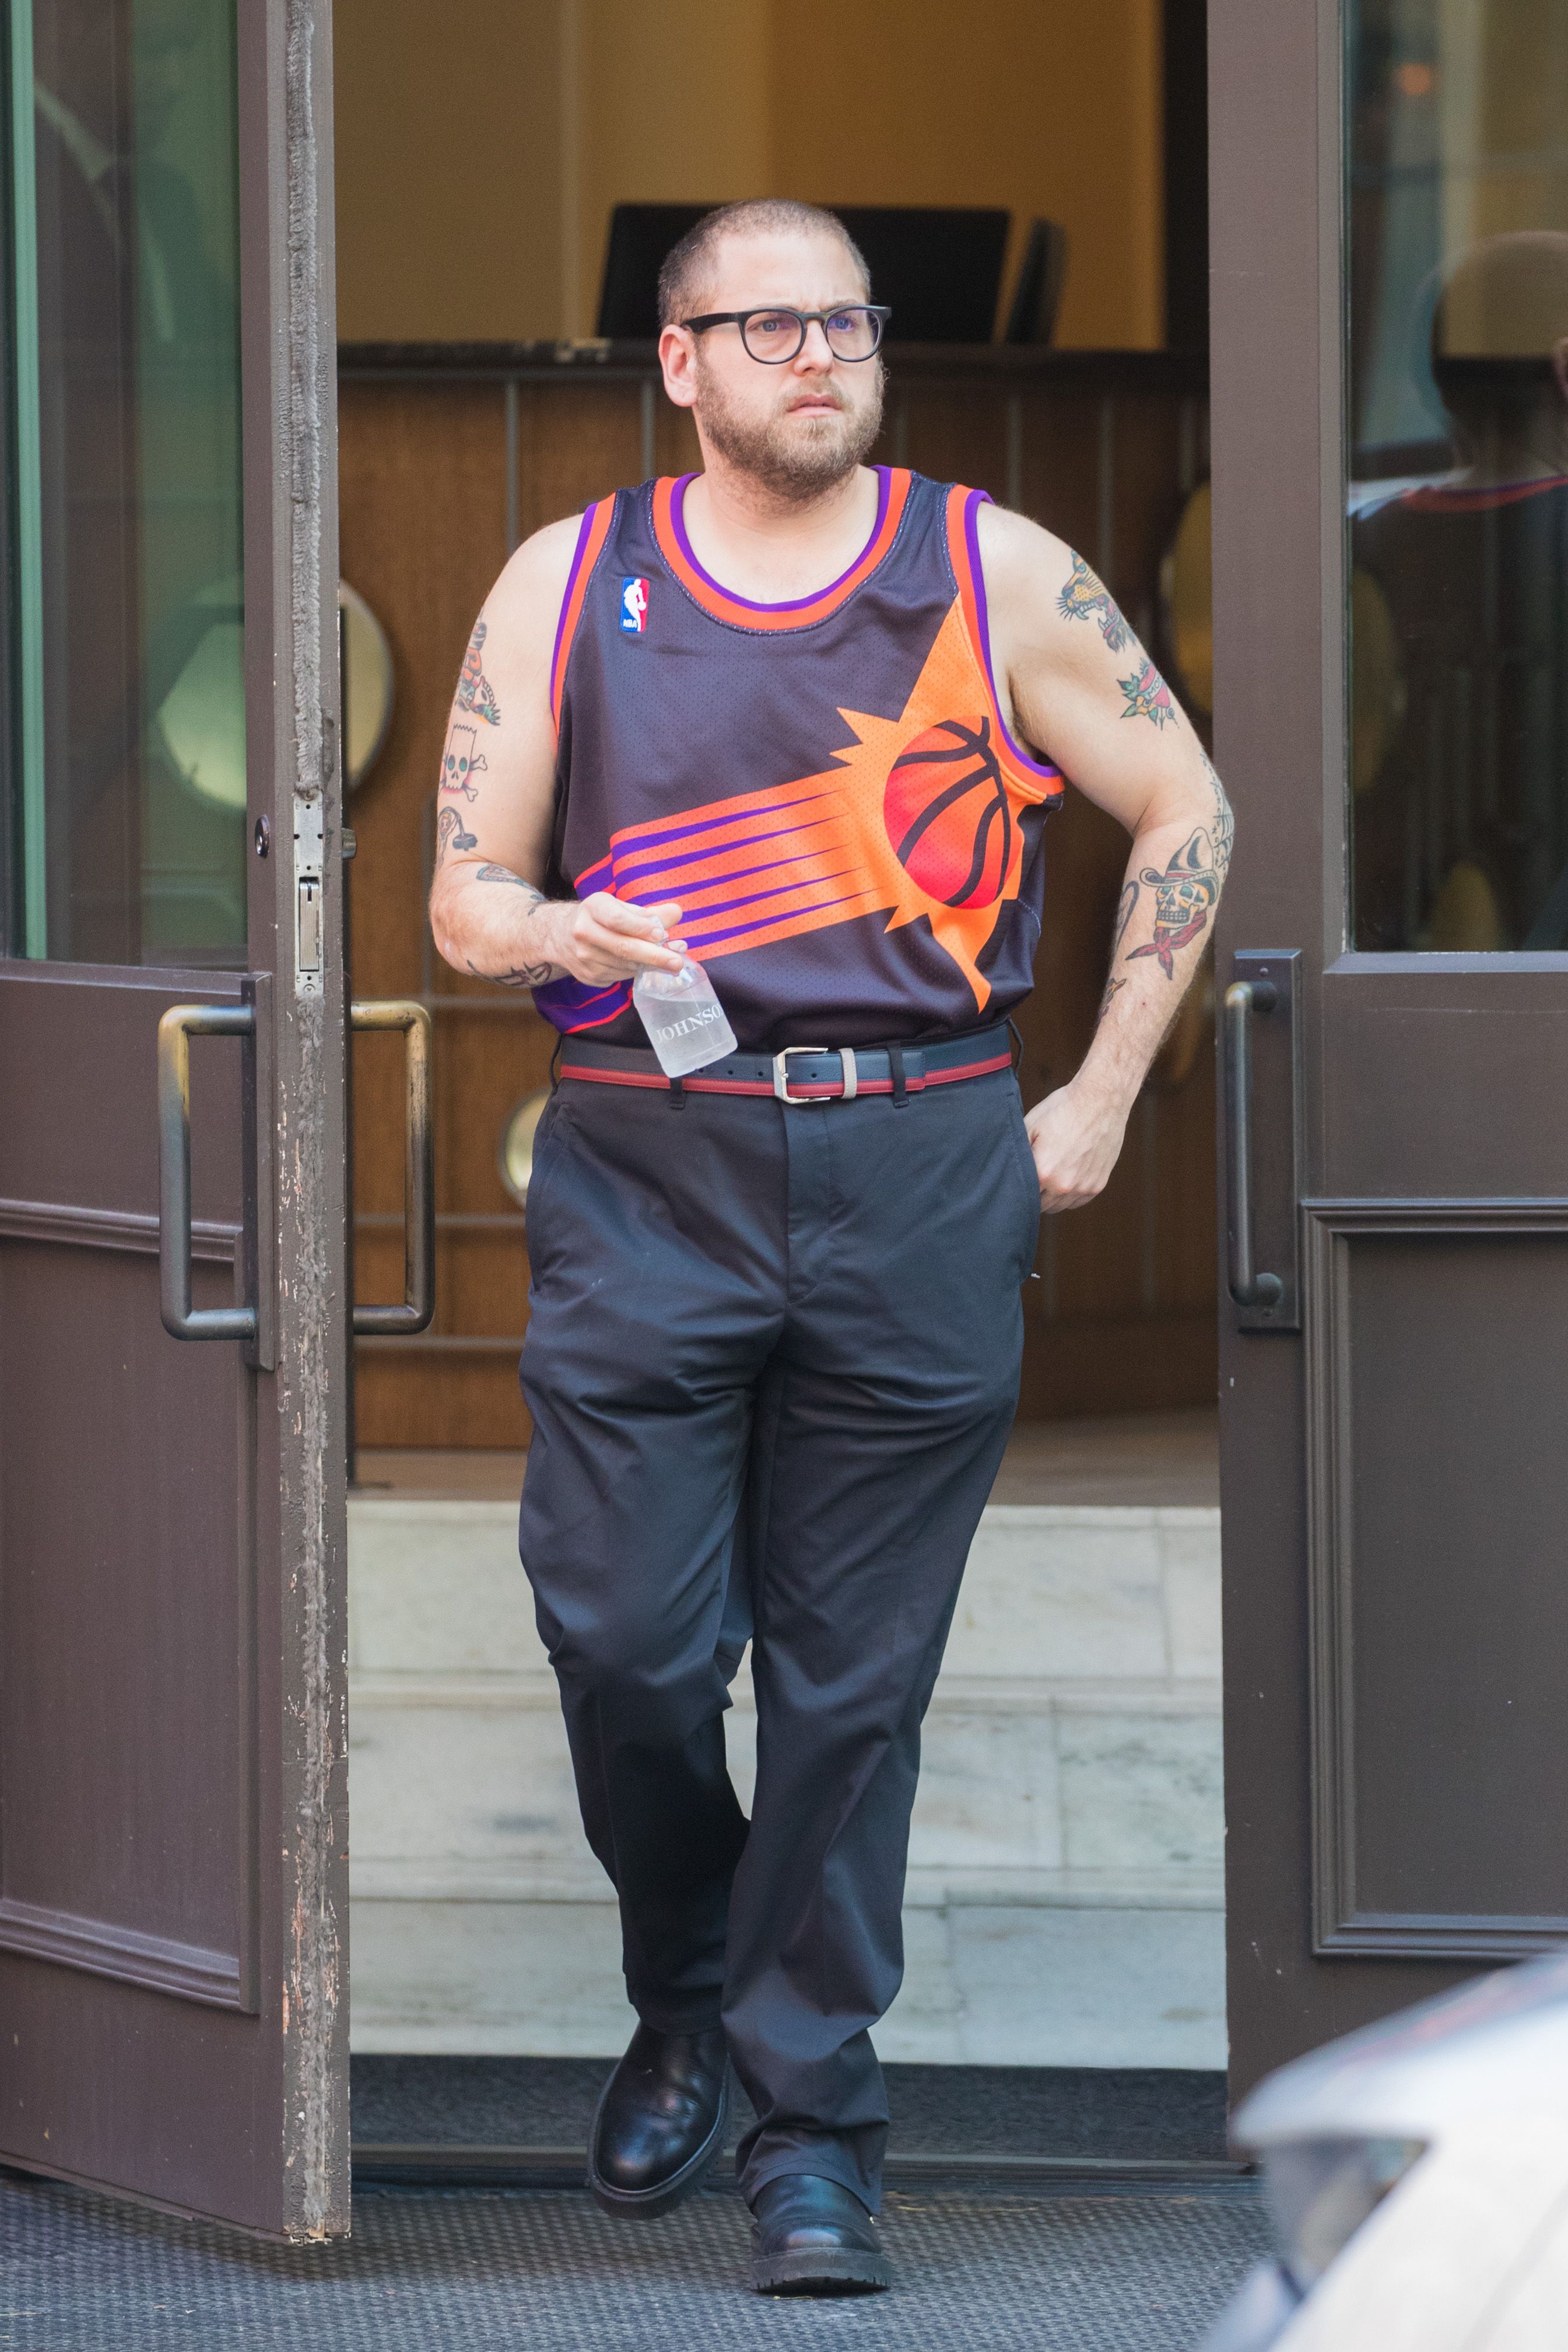 Jonah Hill shows off his guns in Phoenix Suns jersey tucked into trousers  while out in New York